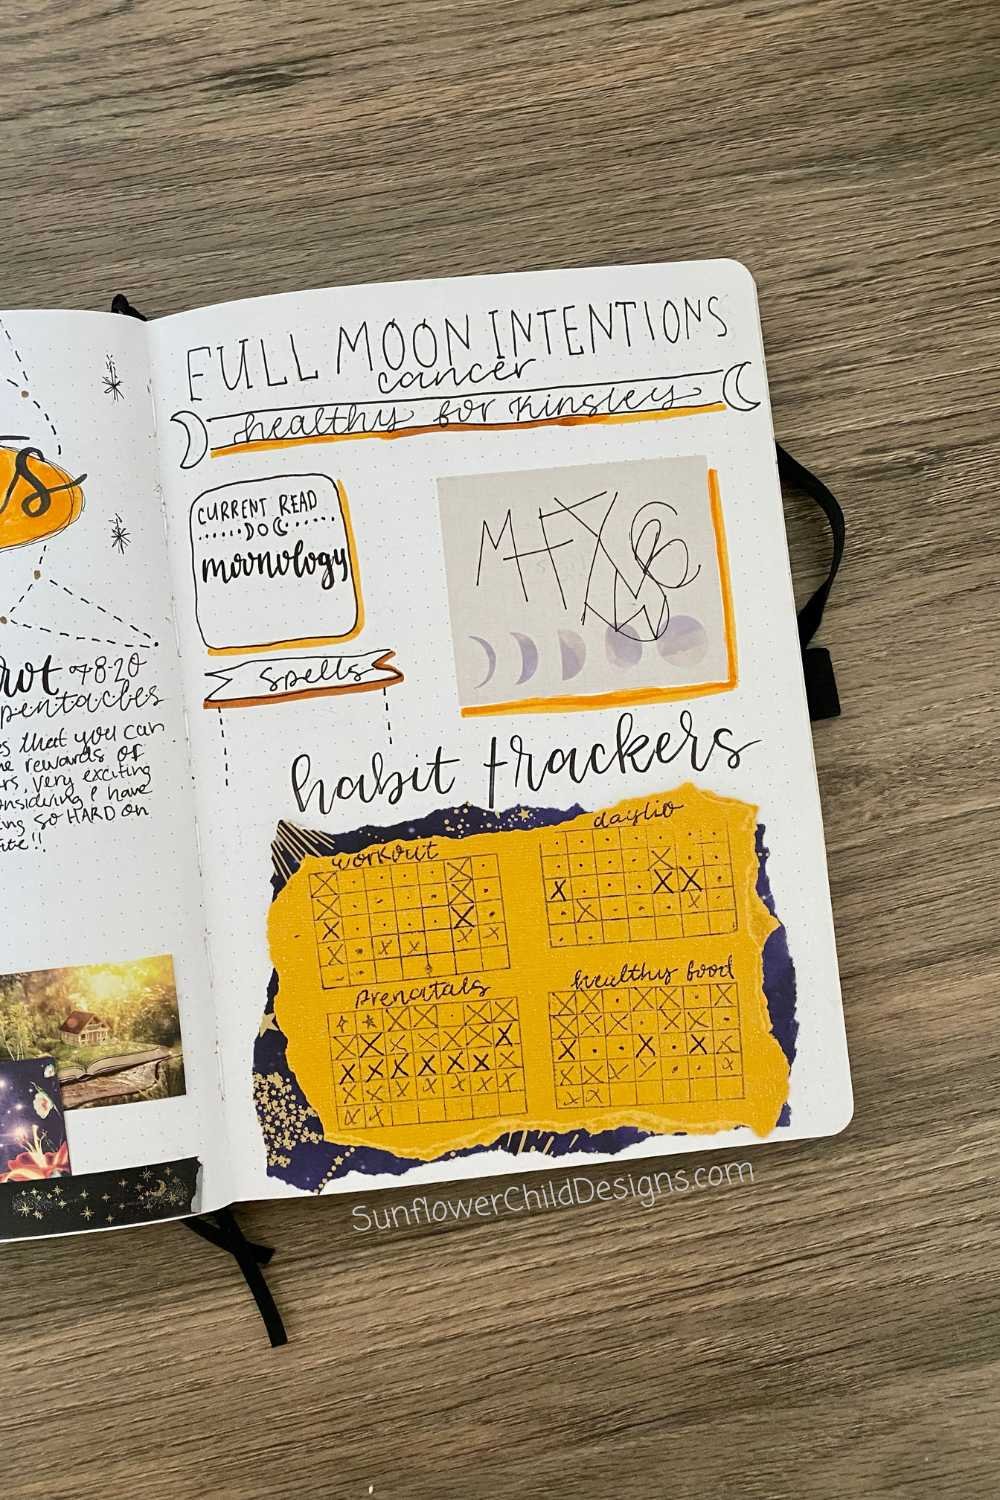 Witchy-Aesthetic-Bullet Journal-Pages-5.jpg